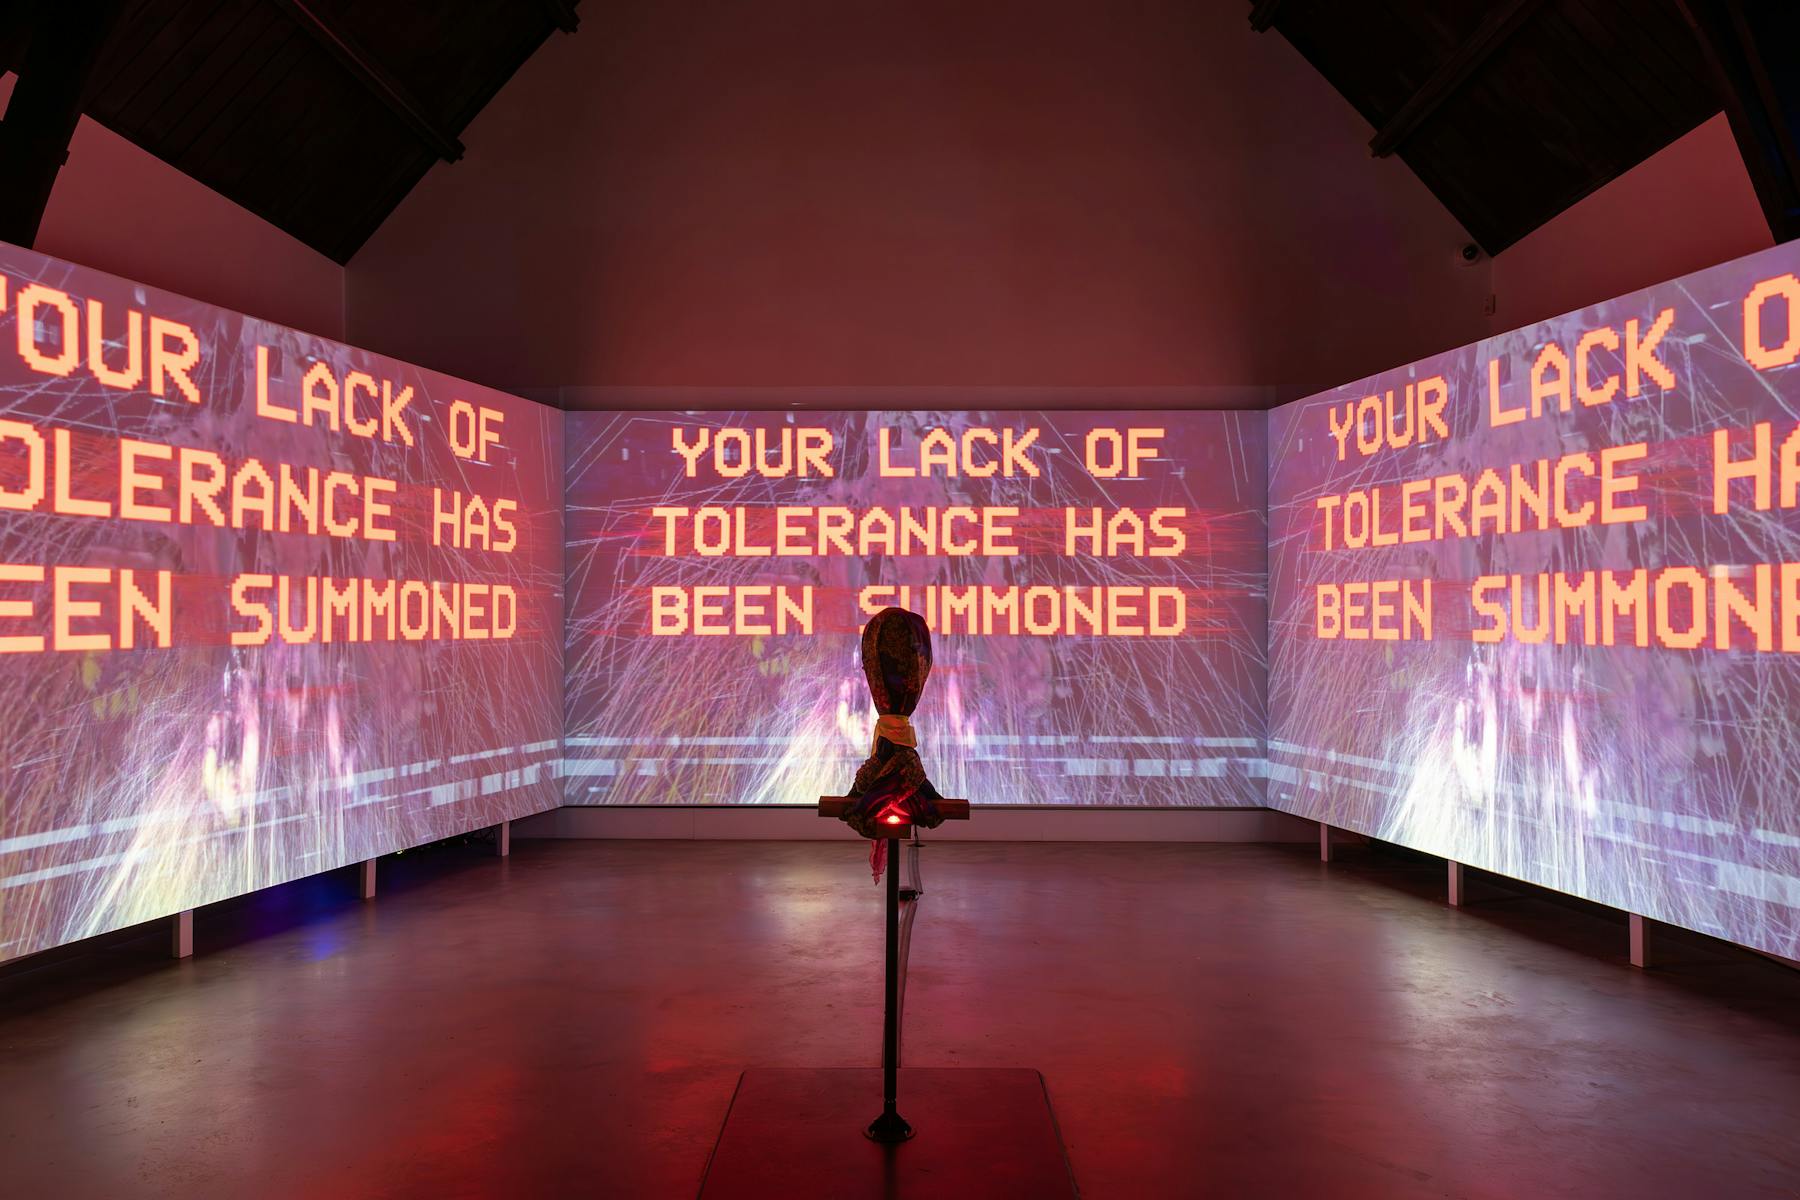 a photograph of three screens that are projected with bright and graphic images. There is text that reads 'YOUR LACK OF TOLERANCE HAS BEEN SUMMONED'. In the foreground there is a hooded object on a stand. 